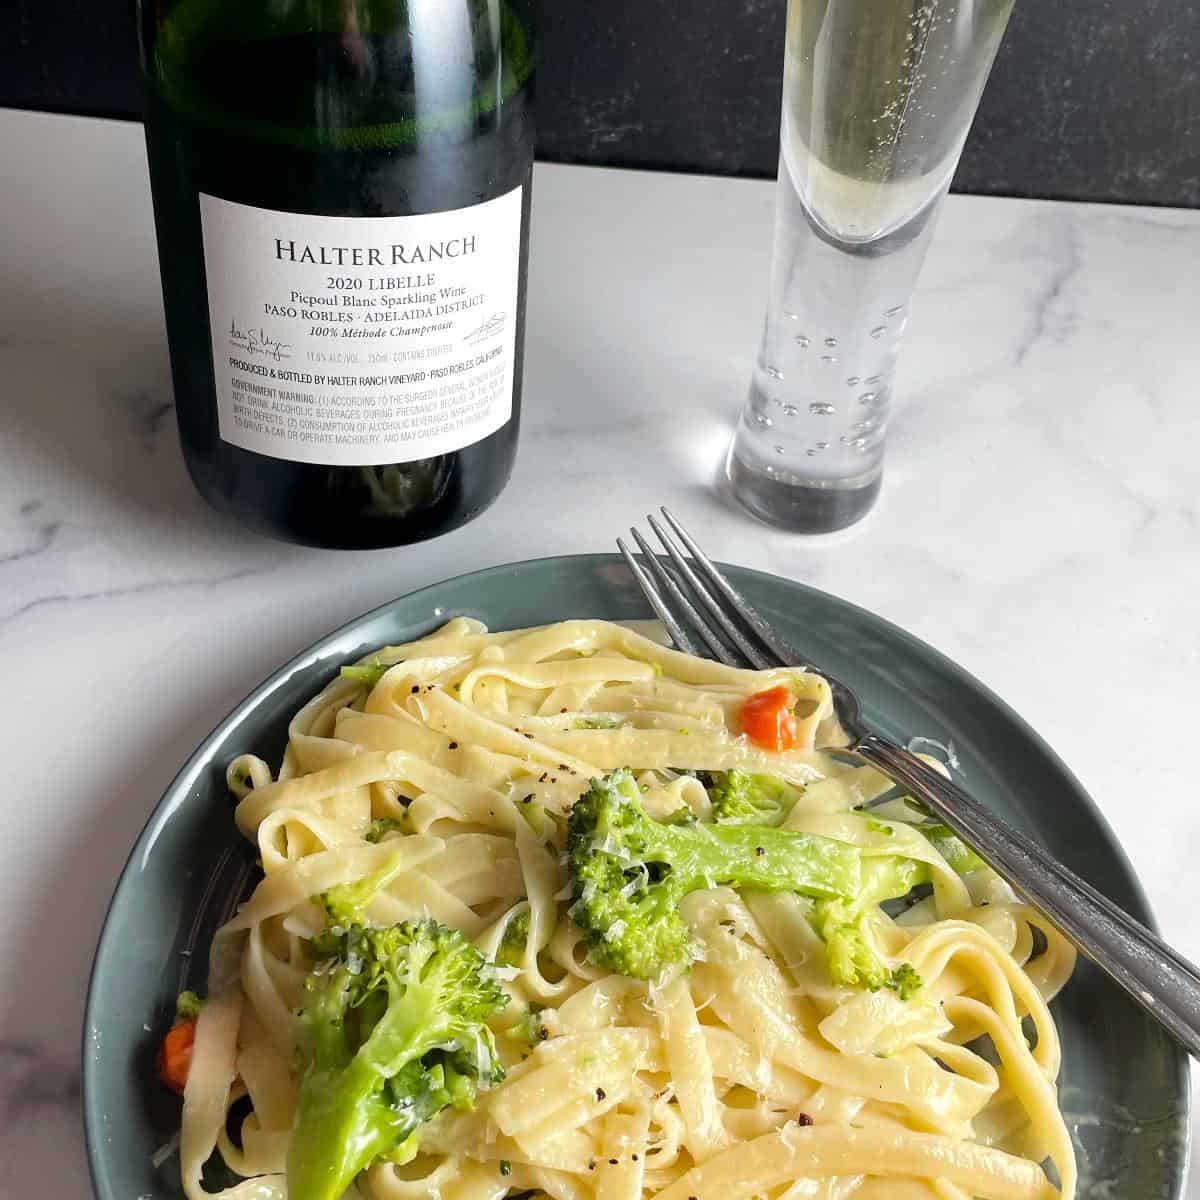 plate of fettuccine primavera with Libelle sparkling wine from Halter Ranch.